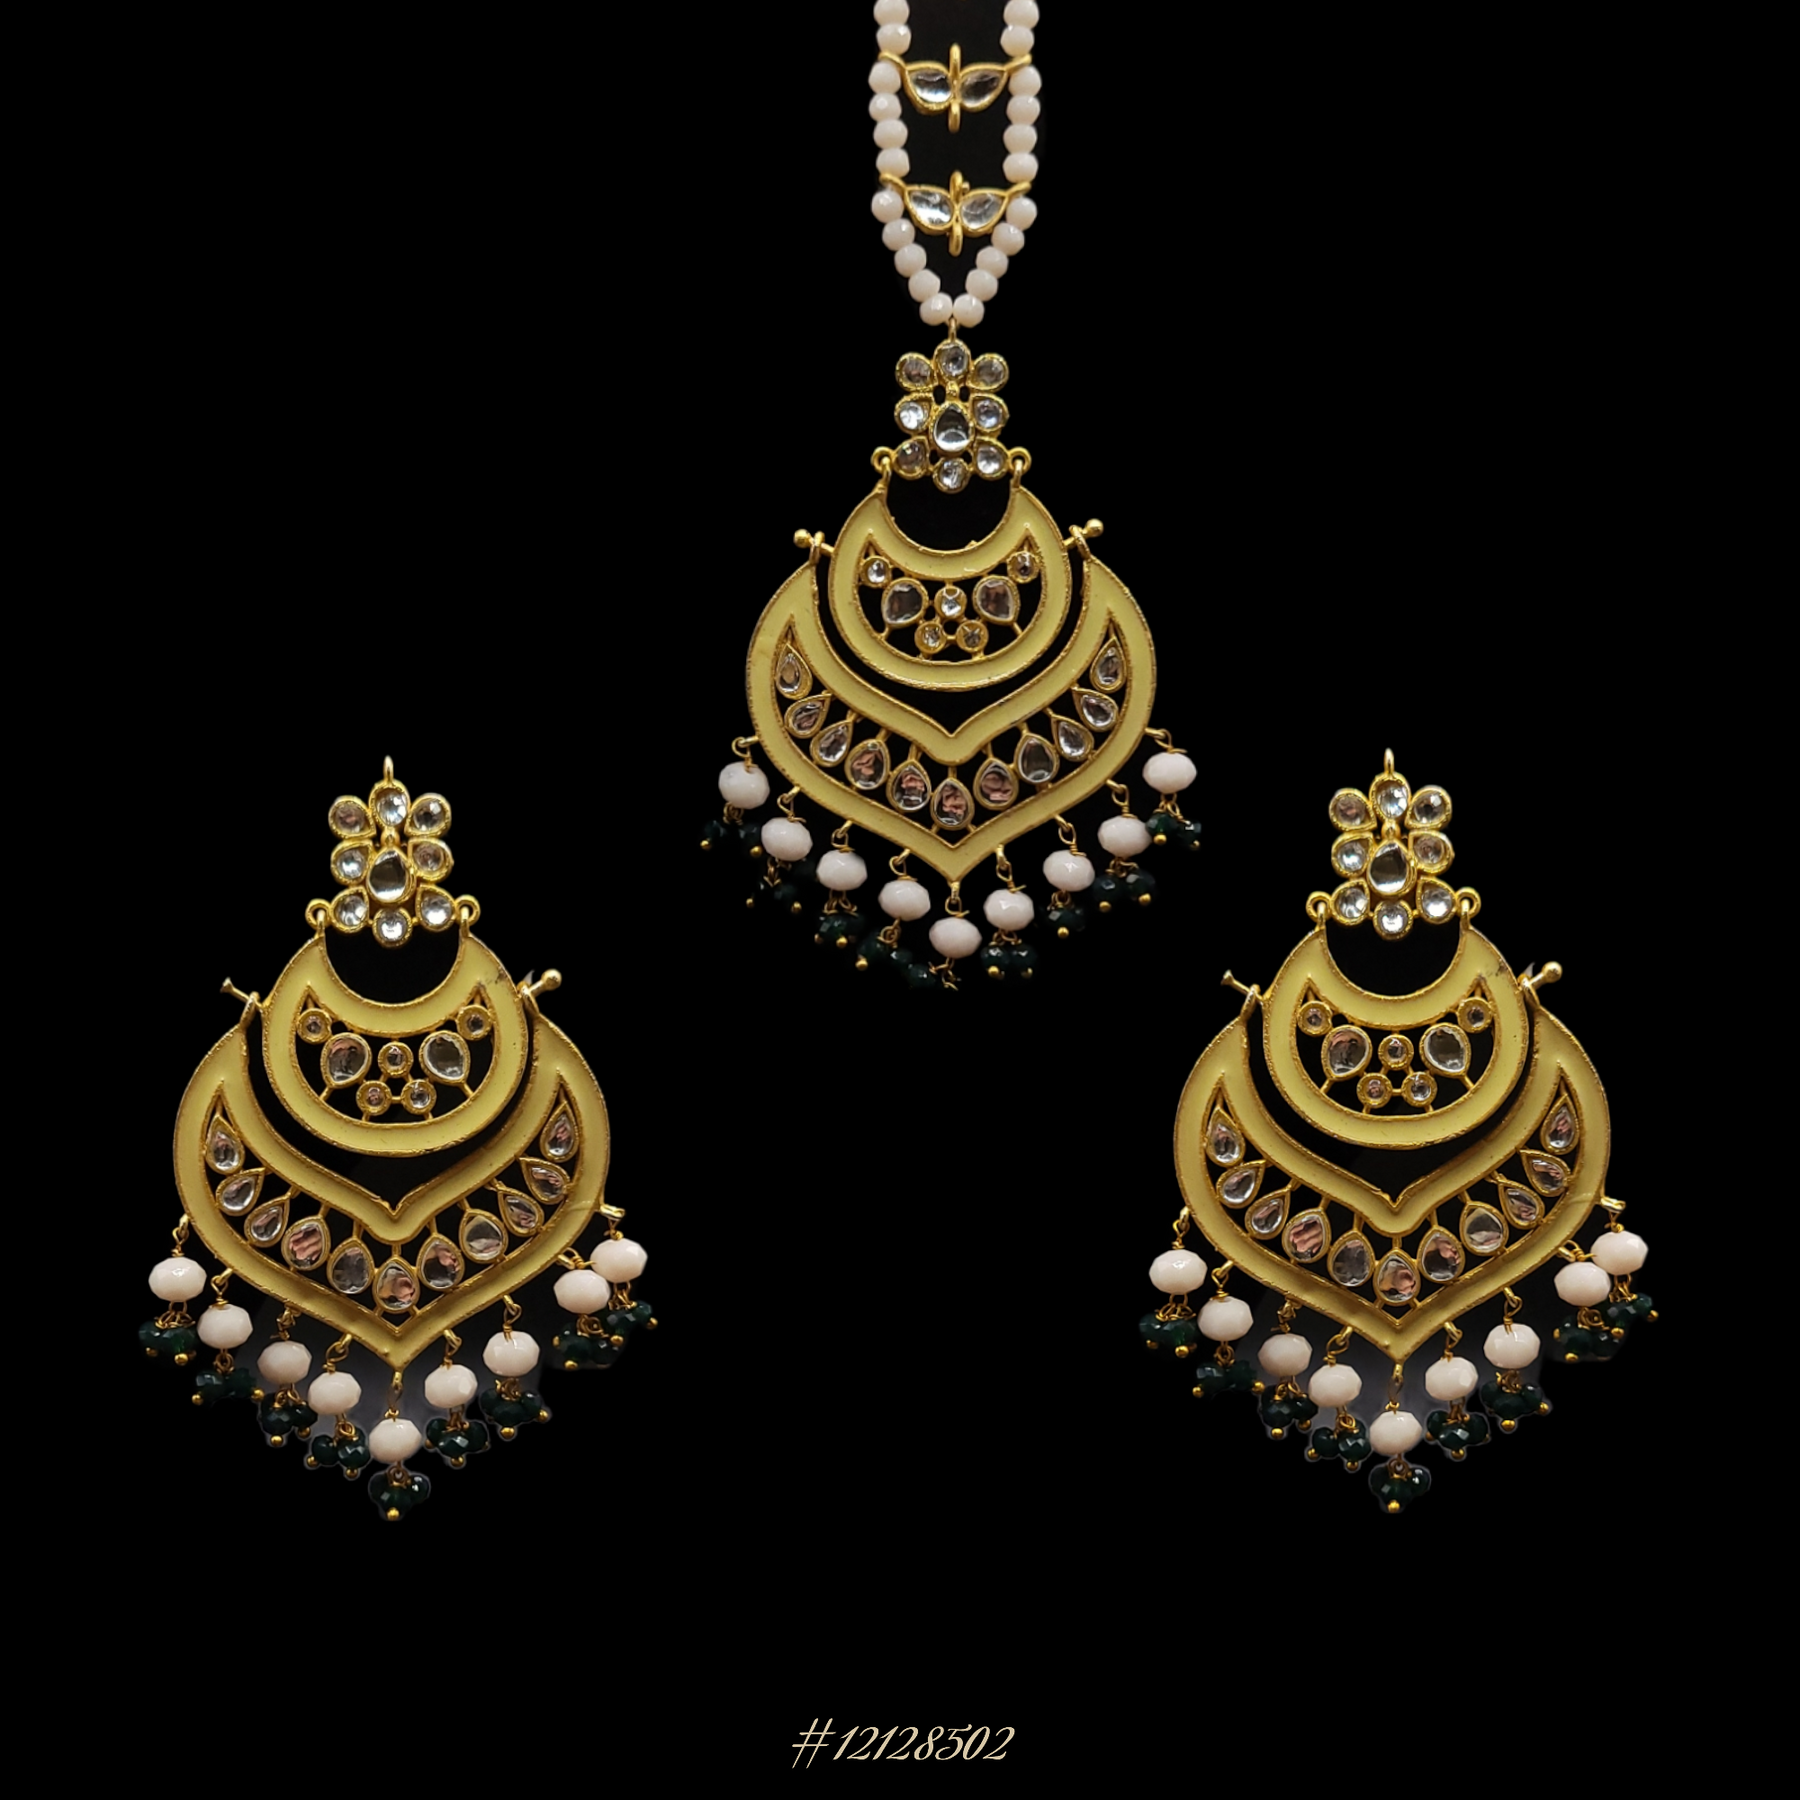 ELEGANT EARRINGS WITH MAANG TIKKA (HEAD PIECE) IN GOLD/YELLOW AND GREEN